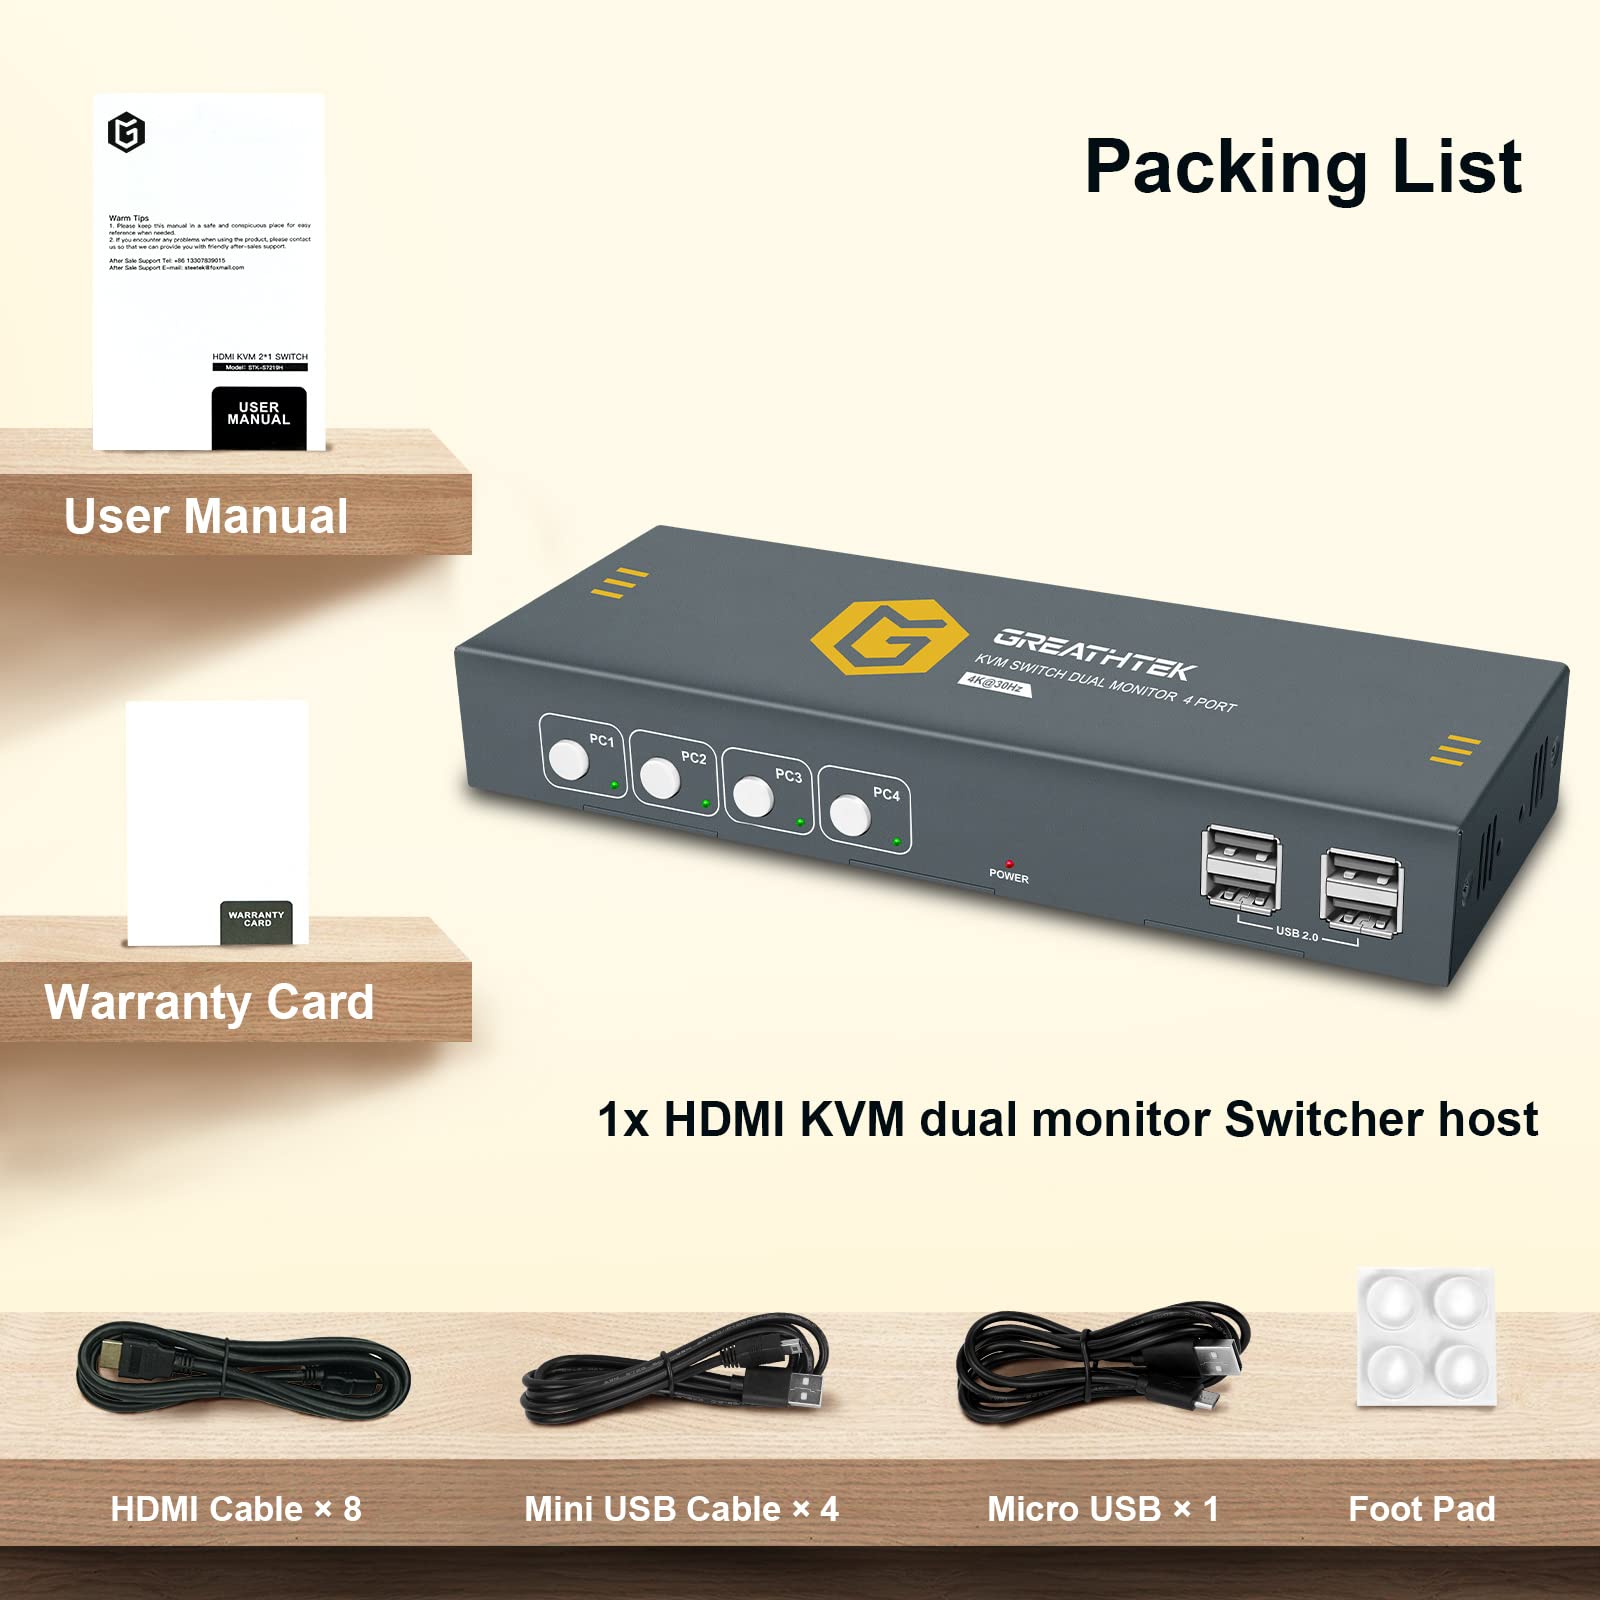 KVM Switch HDMI Dual Monitor Extended Display 4 Port, 4 USB 2.0 Hub, UHD 4K@30Hz Downward Compatible, Button Switch, with All Needed Cables, No Adapter Required